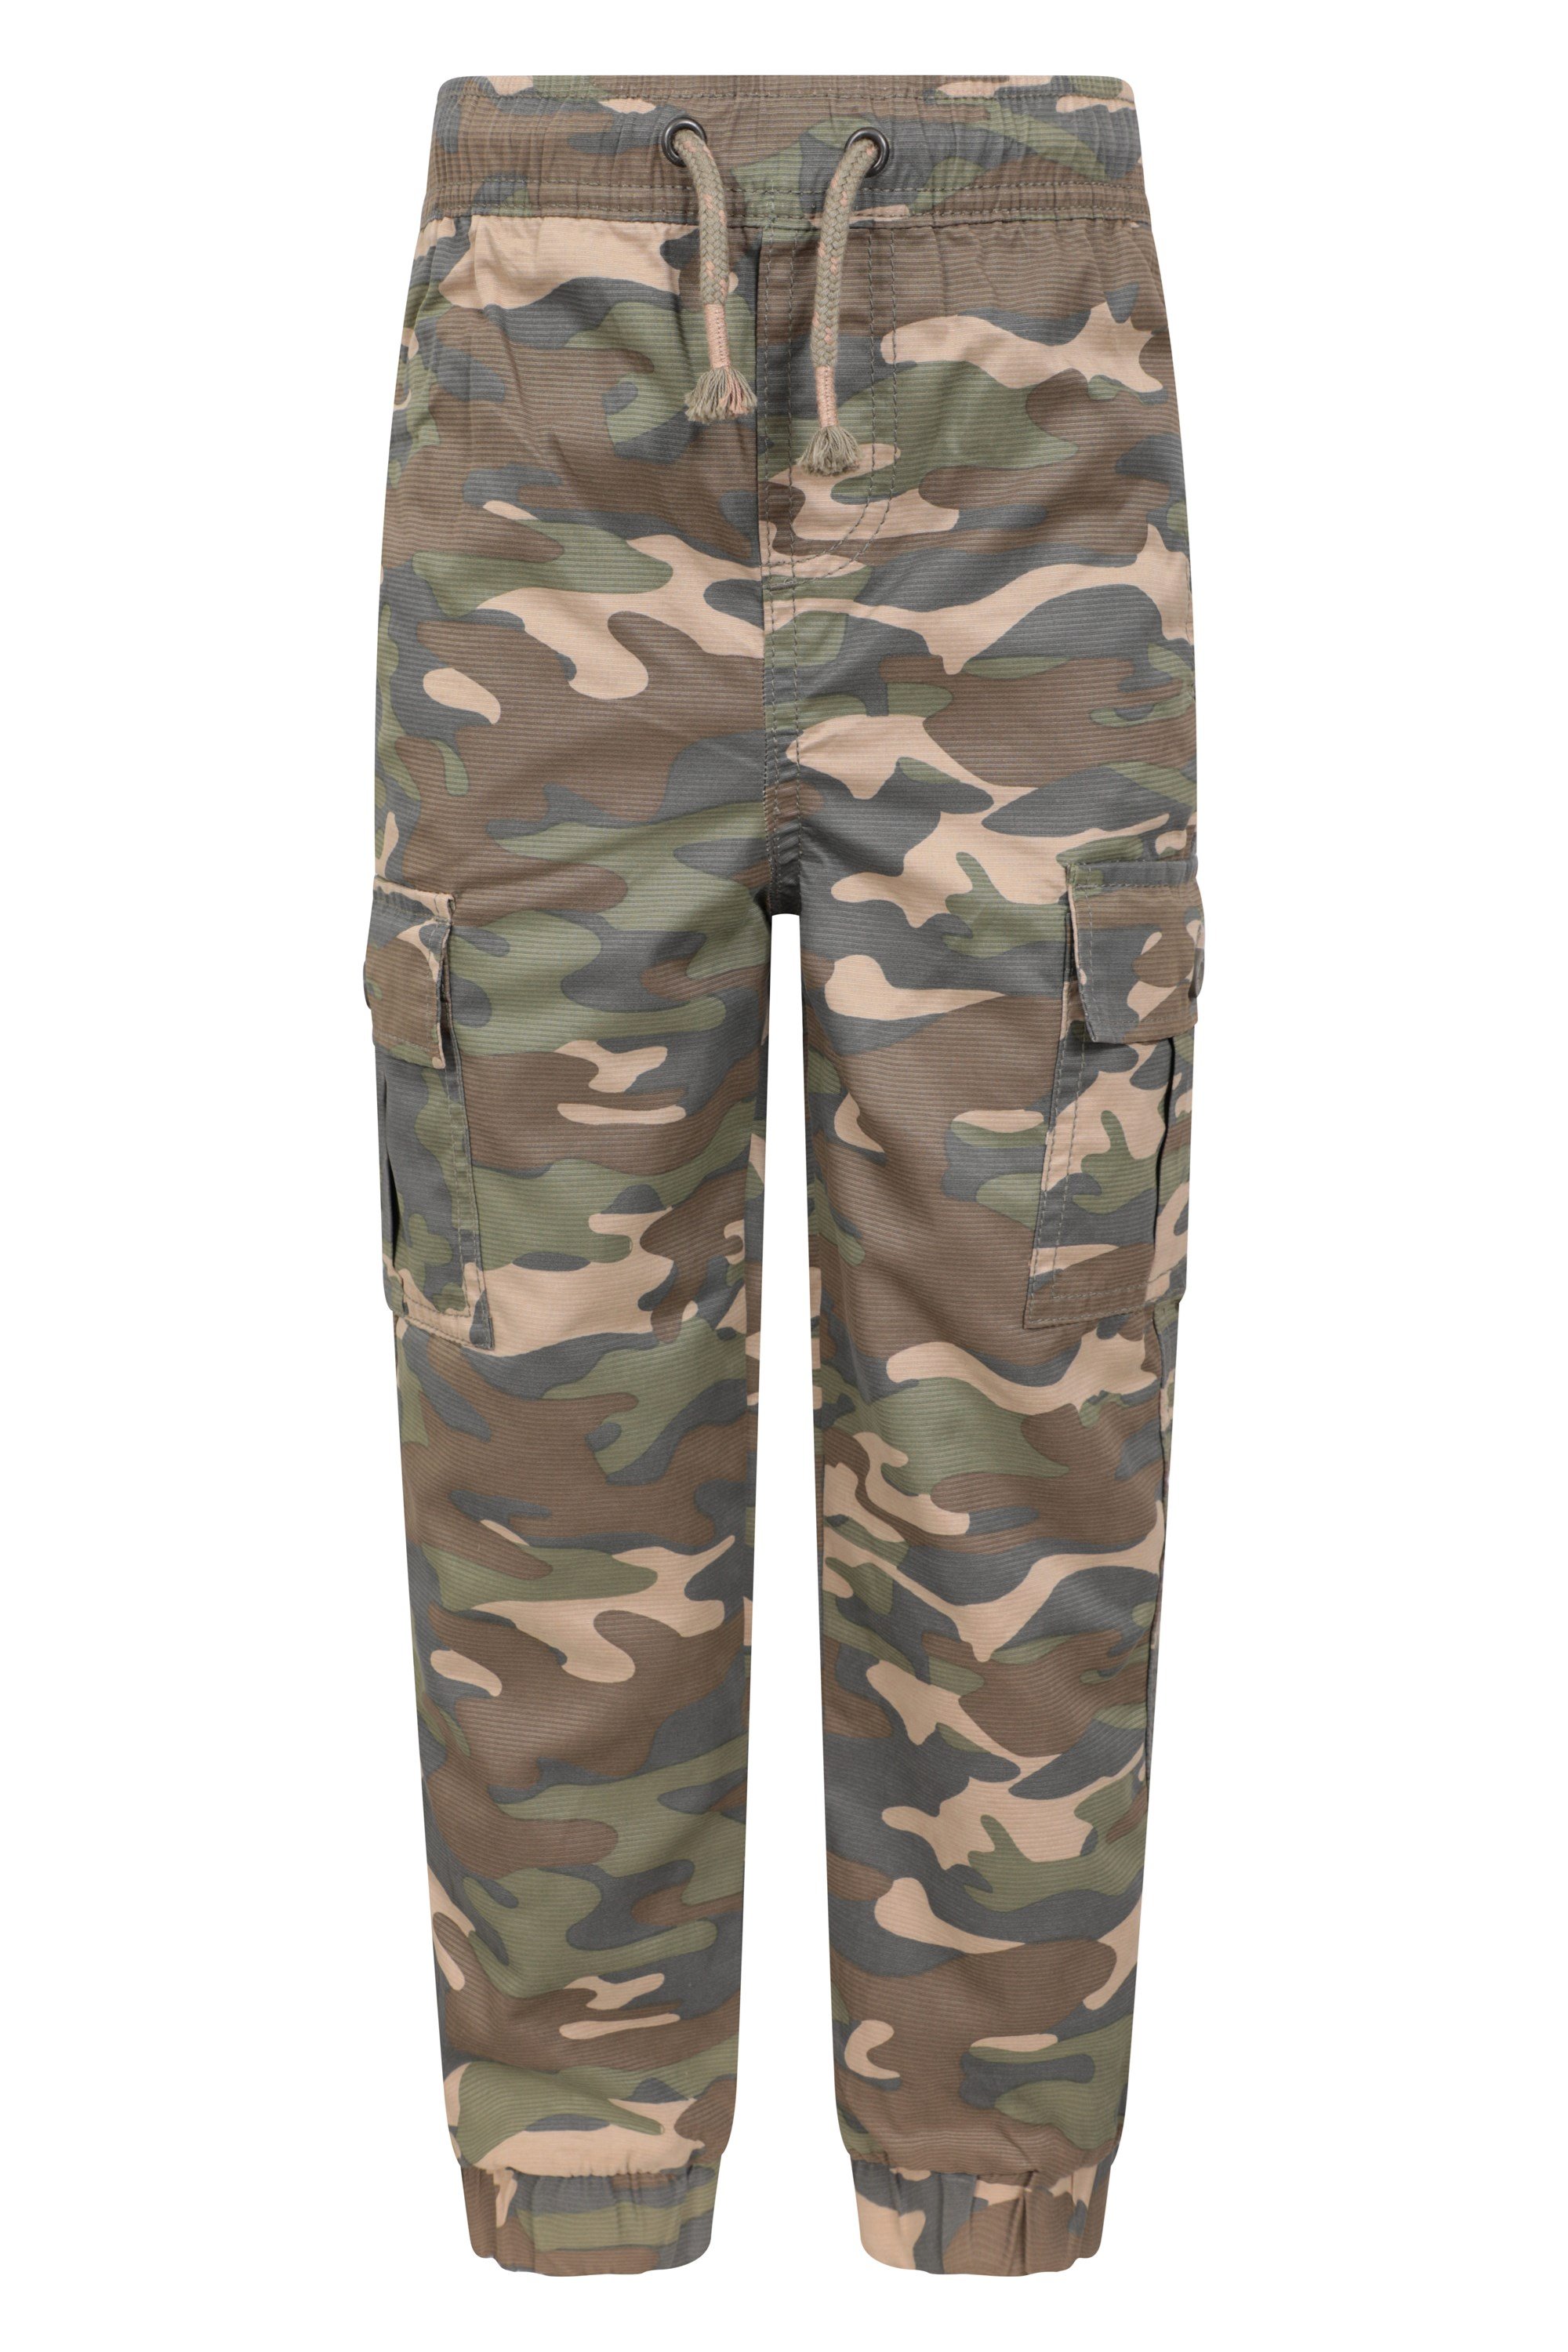 Buy ZODLLS Women's Camo Pants Cargo Trousers Cool Camouflage Pants Elastic  Waist Casual Multi Outdoor Jogger Pants with Pocket online | Topofstyle